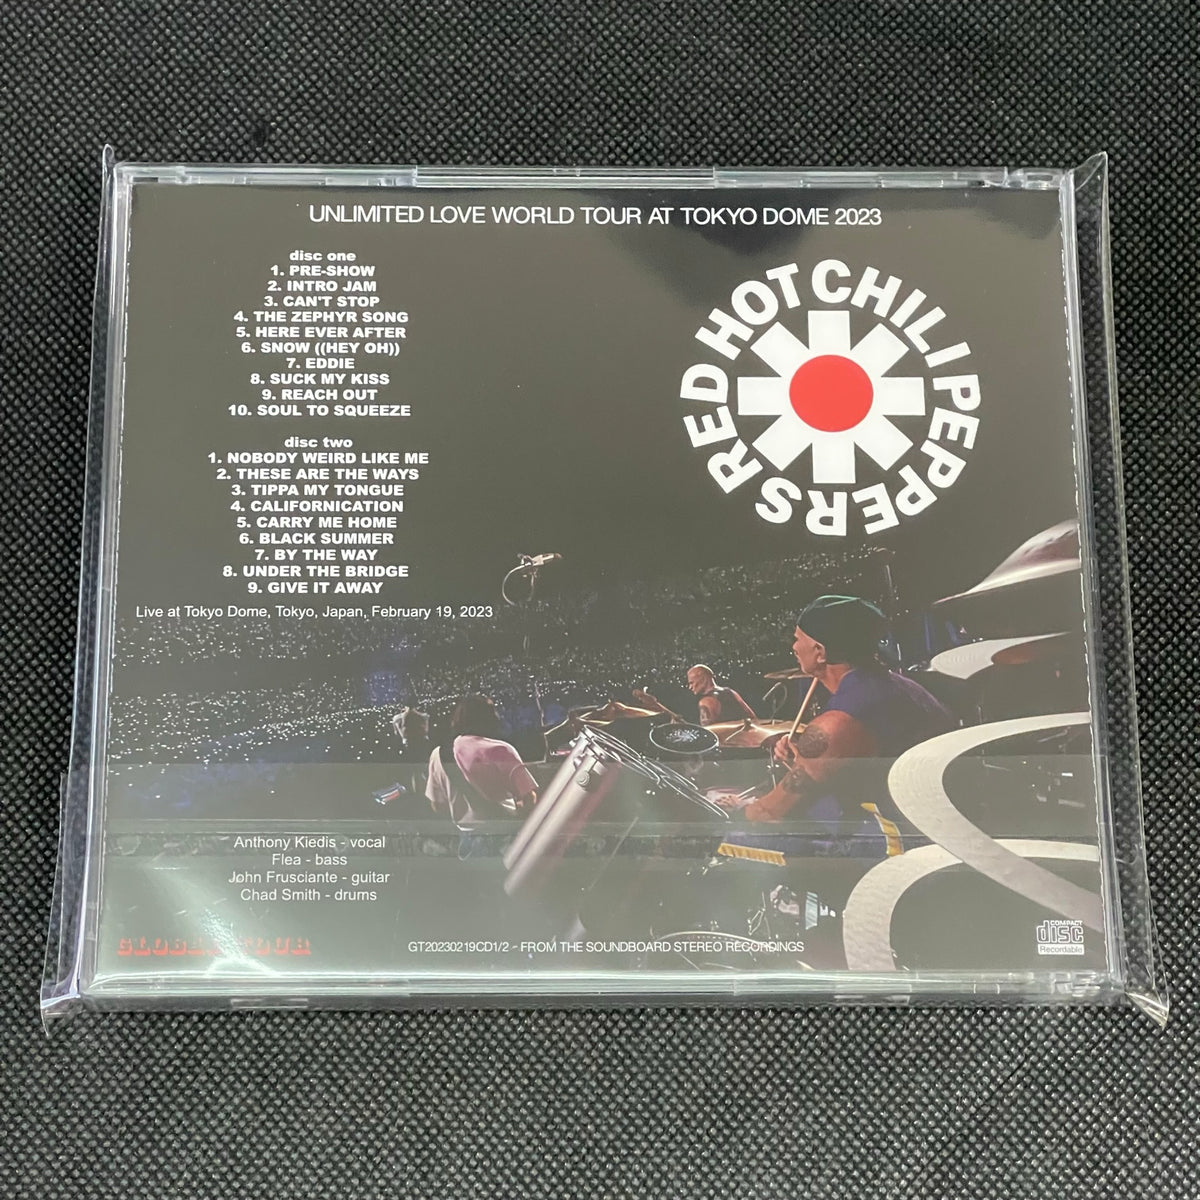 RED HOT CHILI PEPPERS - UNLIMITED LOVE WORLD TOUR AT TOKYO DOME 